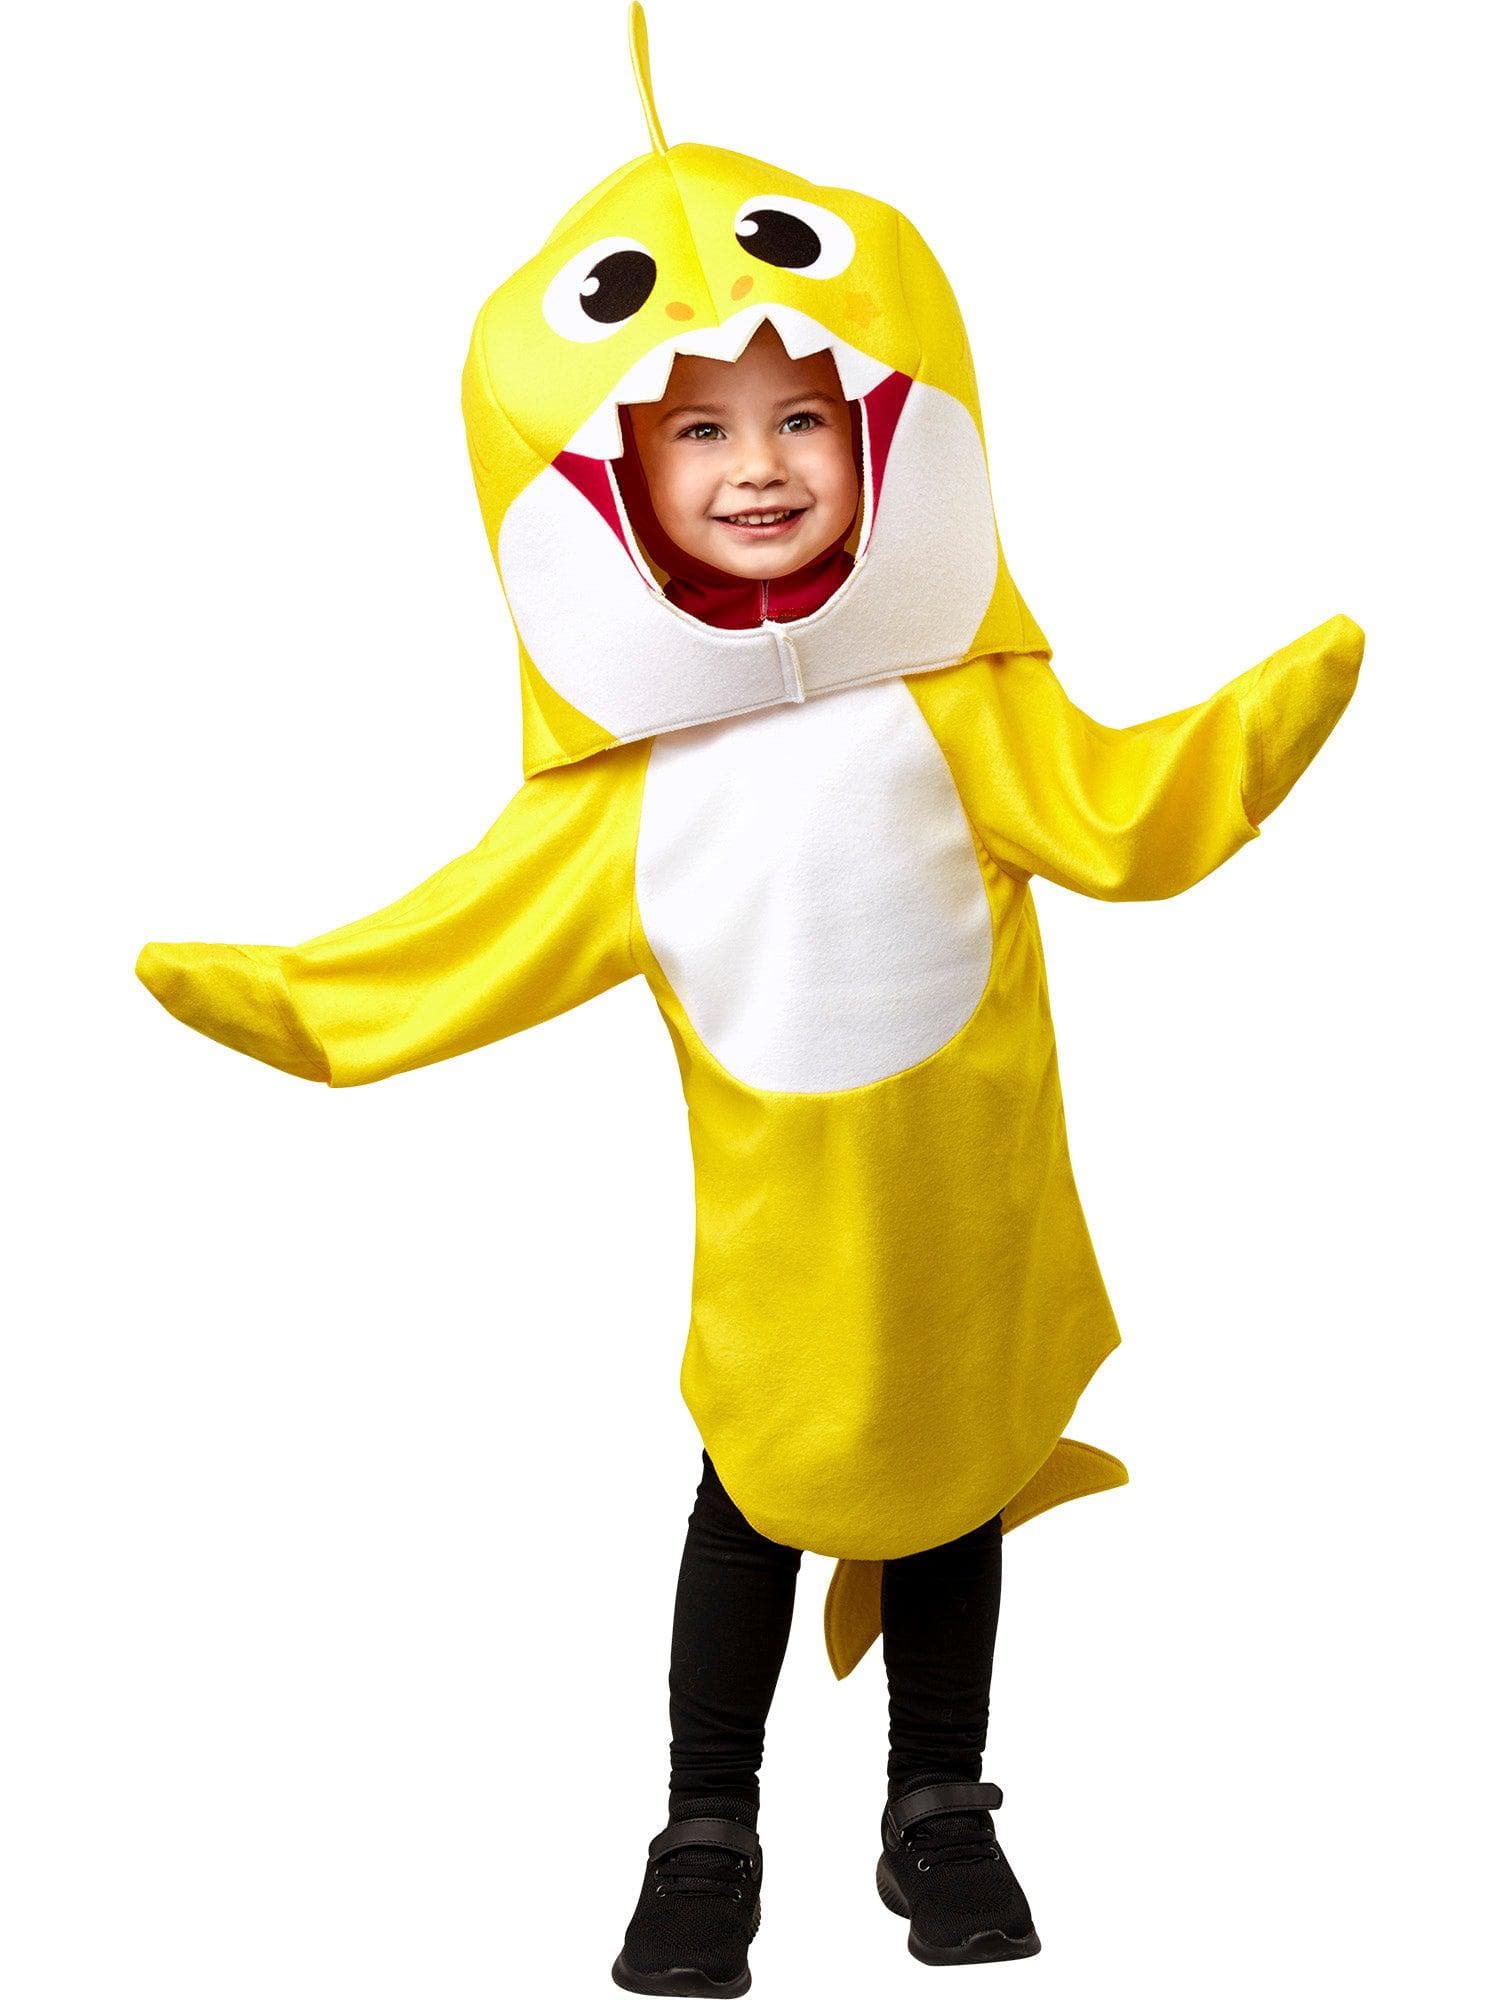 Baby Shark Tunic and Headpiece with Sound for Toddlers - costumes.com